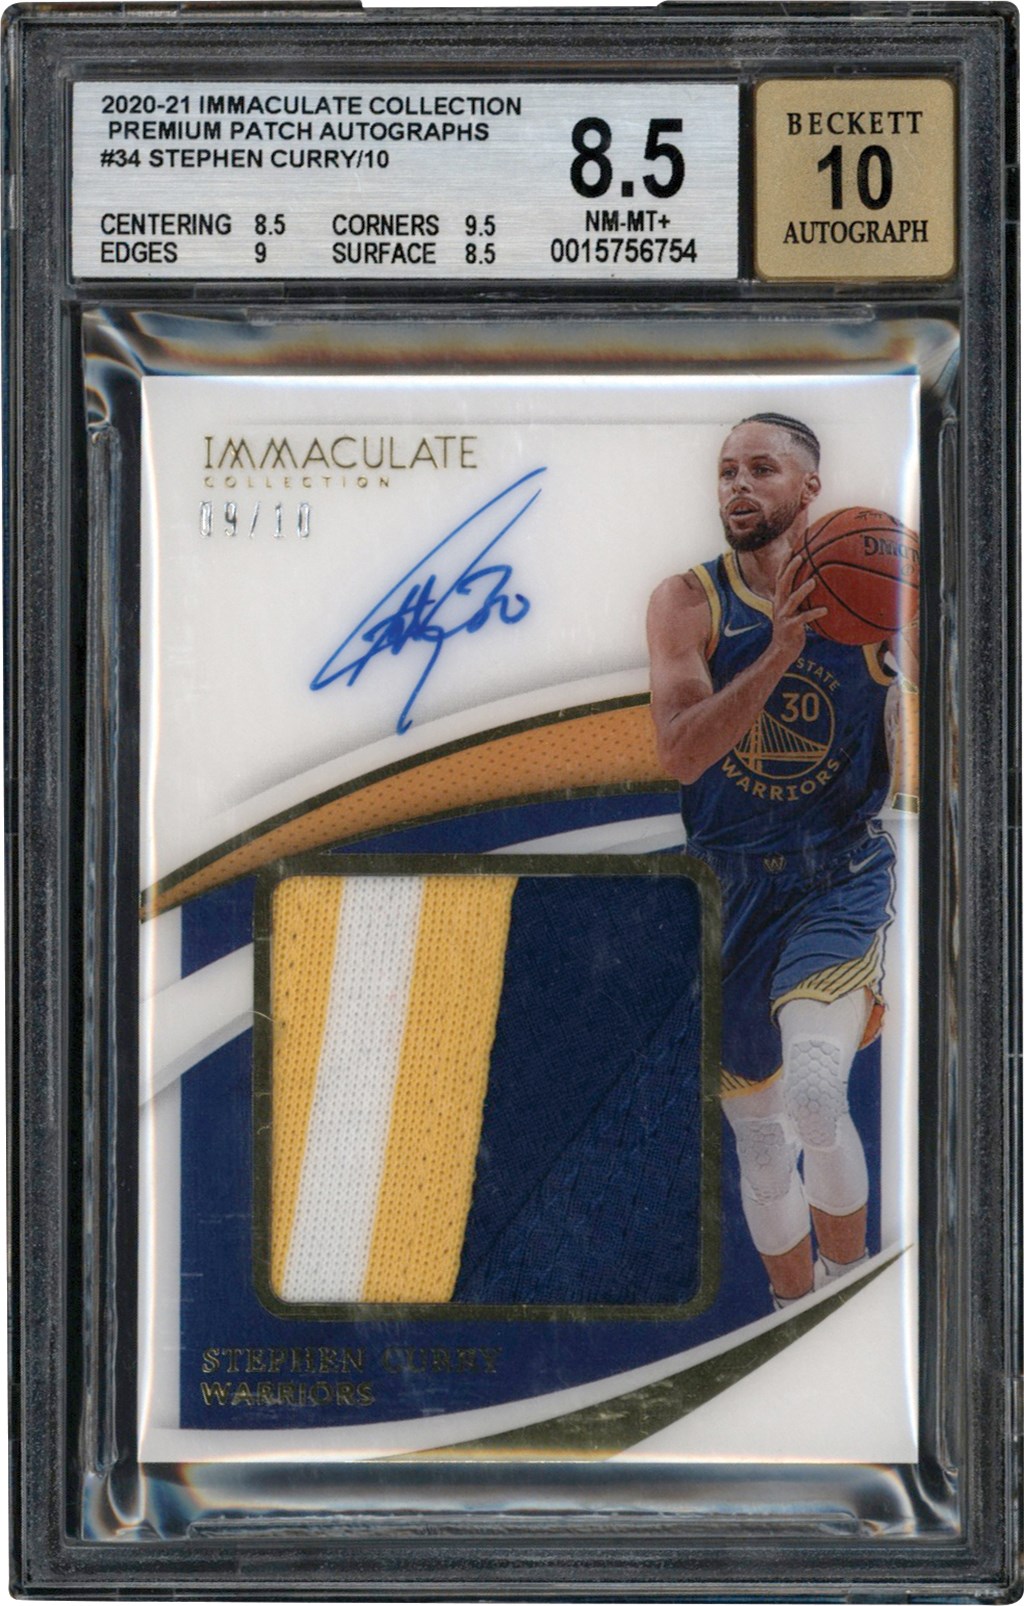 Basketball Cards - 2020-2021 Immaculate Collection Basketball Premium Patch #34 Stephen Curry Game Used Patch Autograph #9/10 BGS NM-MT+ 8.5 Auto 10